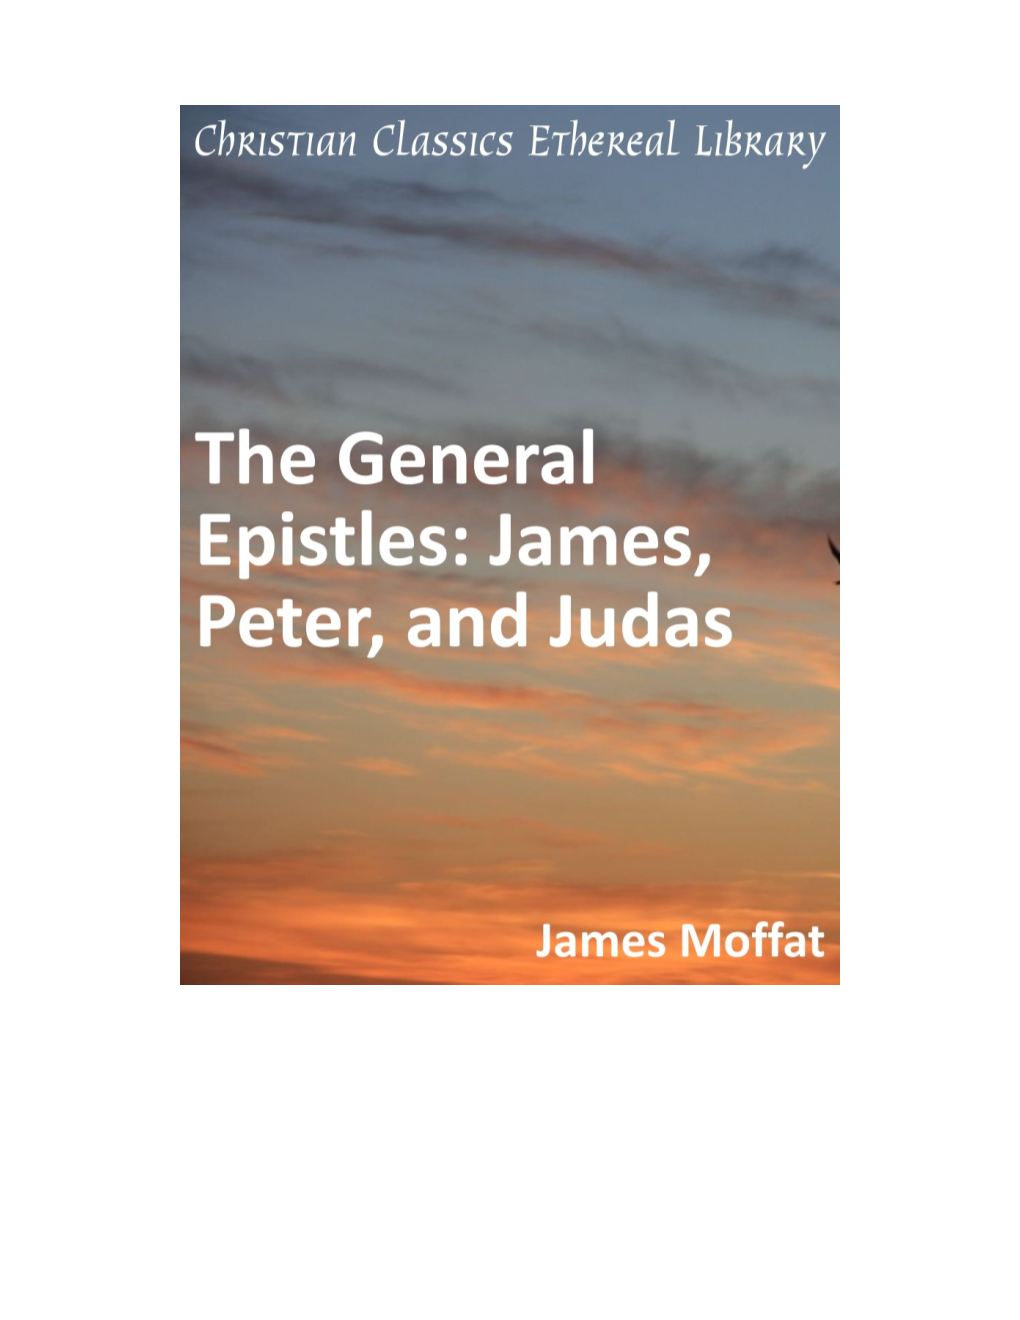 The General Epistles: James, Peter, and Judas